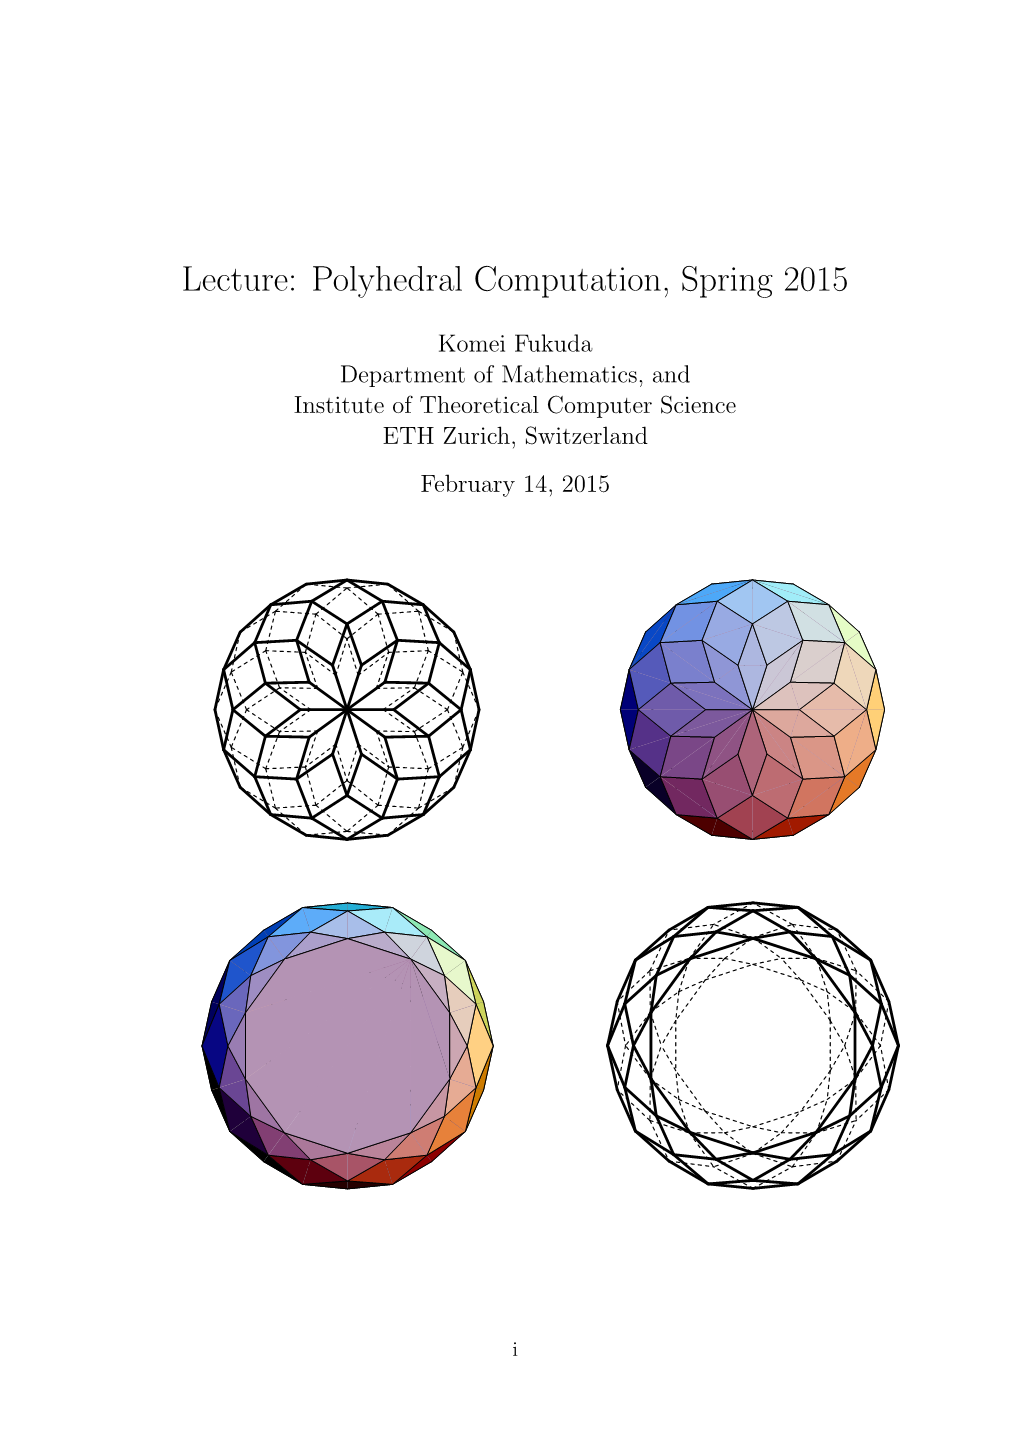 Lecture: Polyhedral Computation, Spring 2015